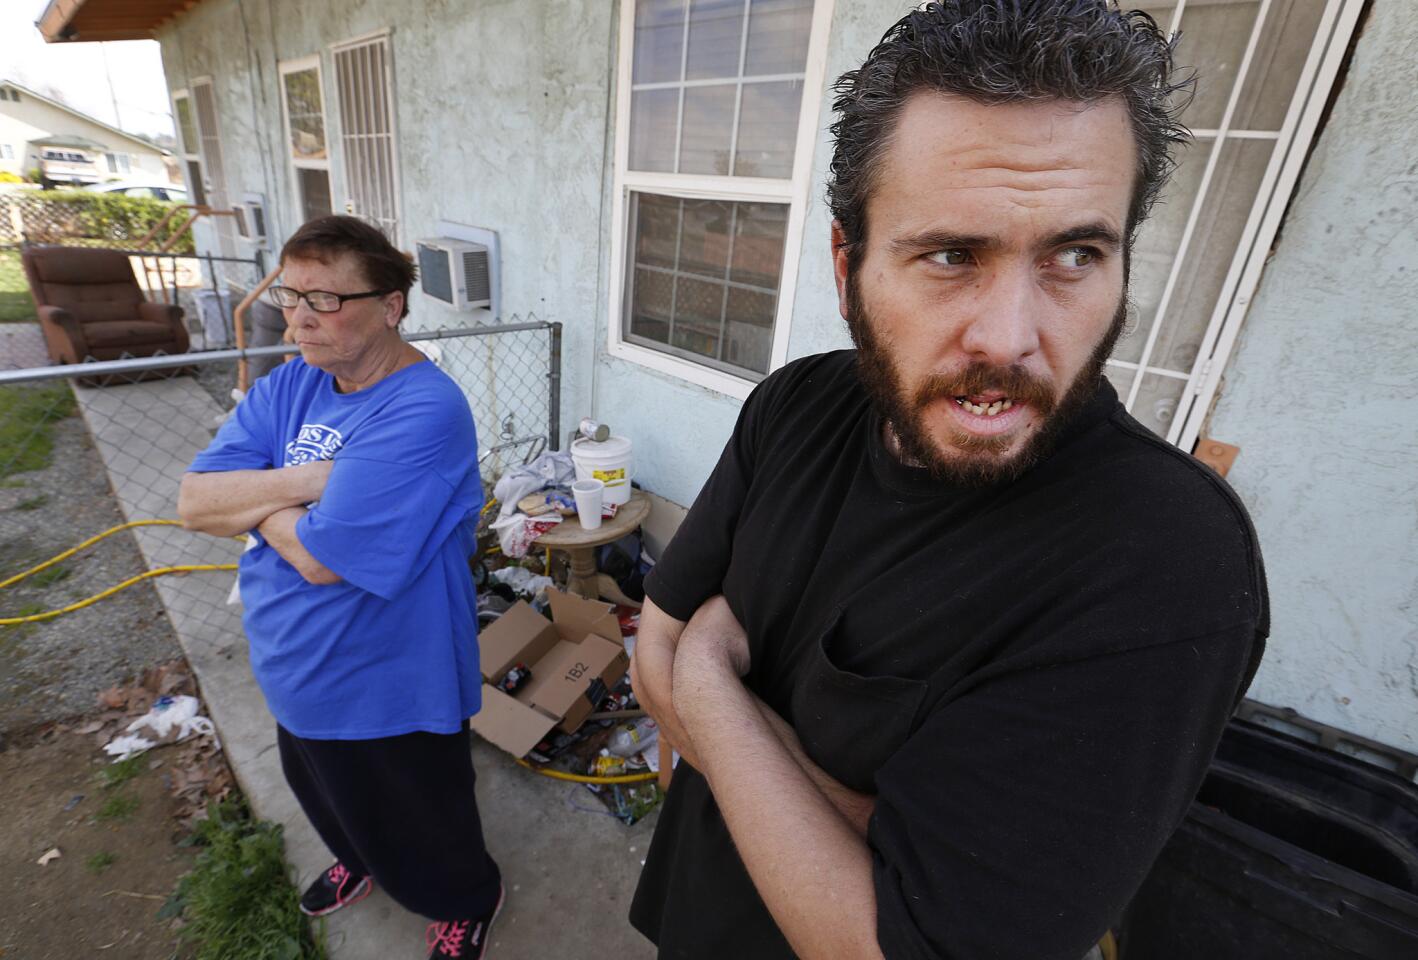 Betty Robison, left, who supports Donald Trump, debates with her 31-year-old son Sean Kearns about the GOP front-runner as they stand in the front yard of their apartment in Oildale, an unincorporated community in Kern County.